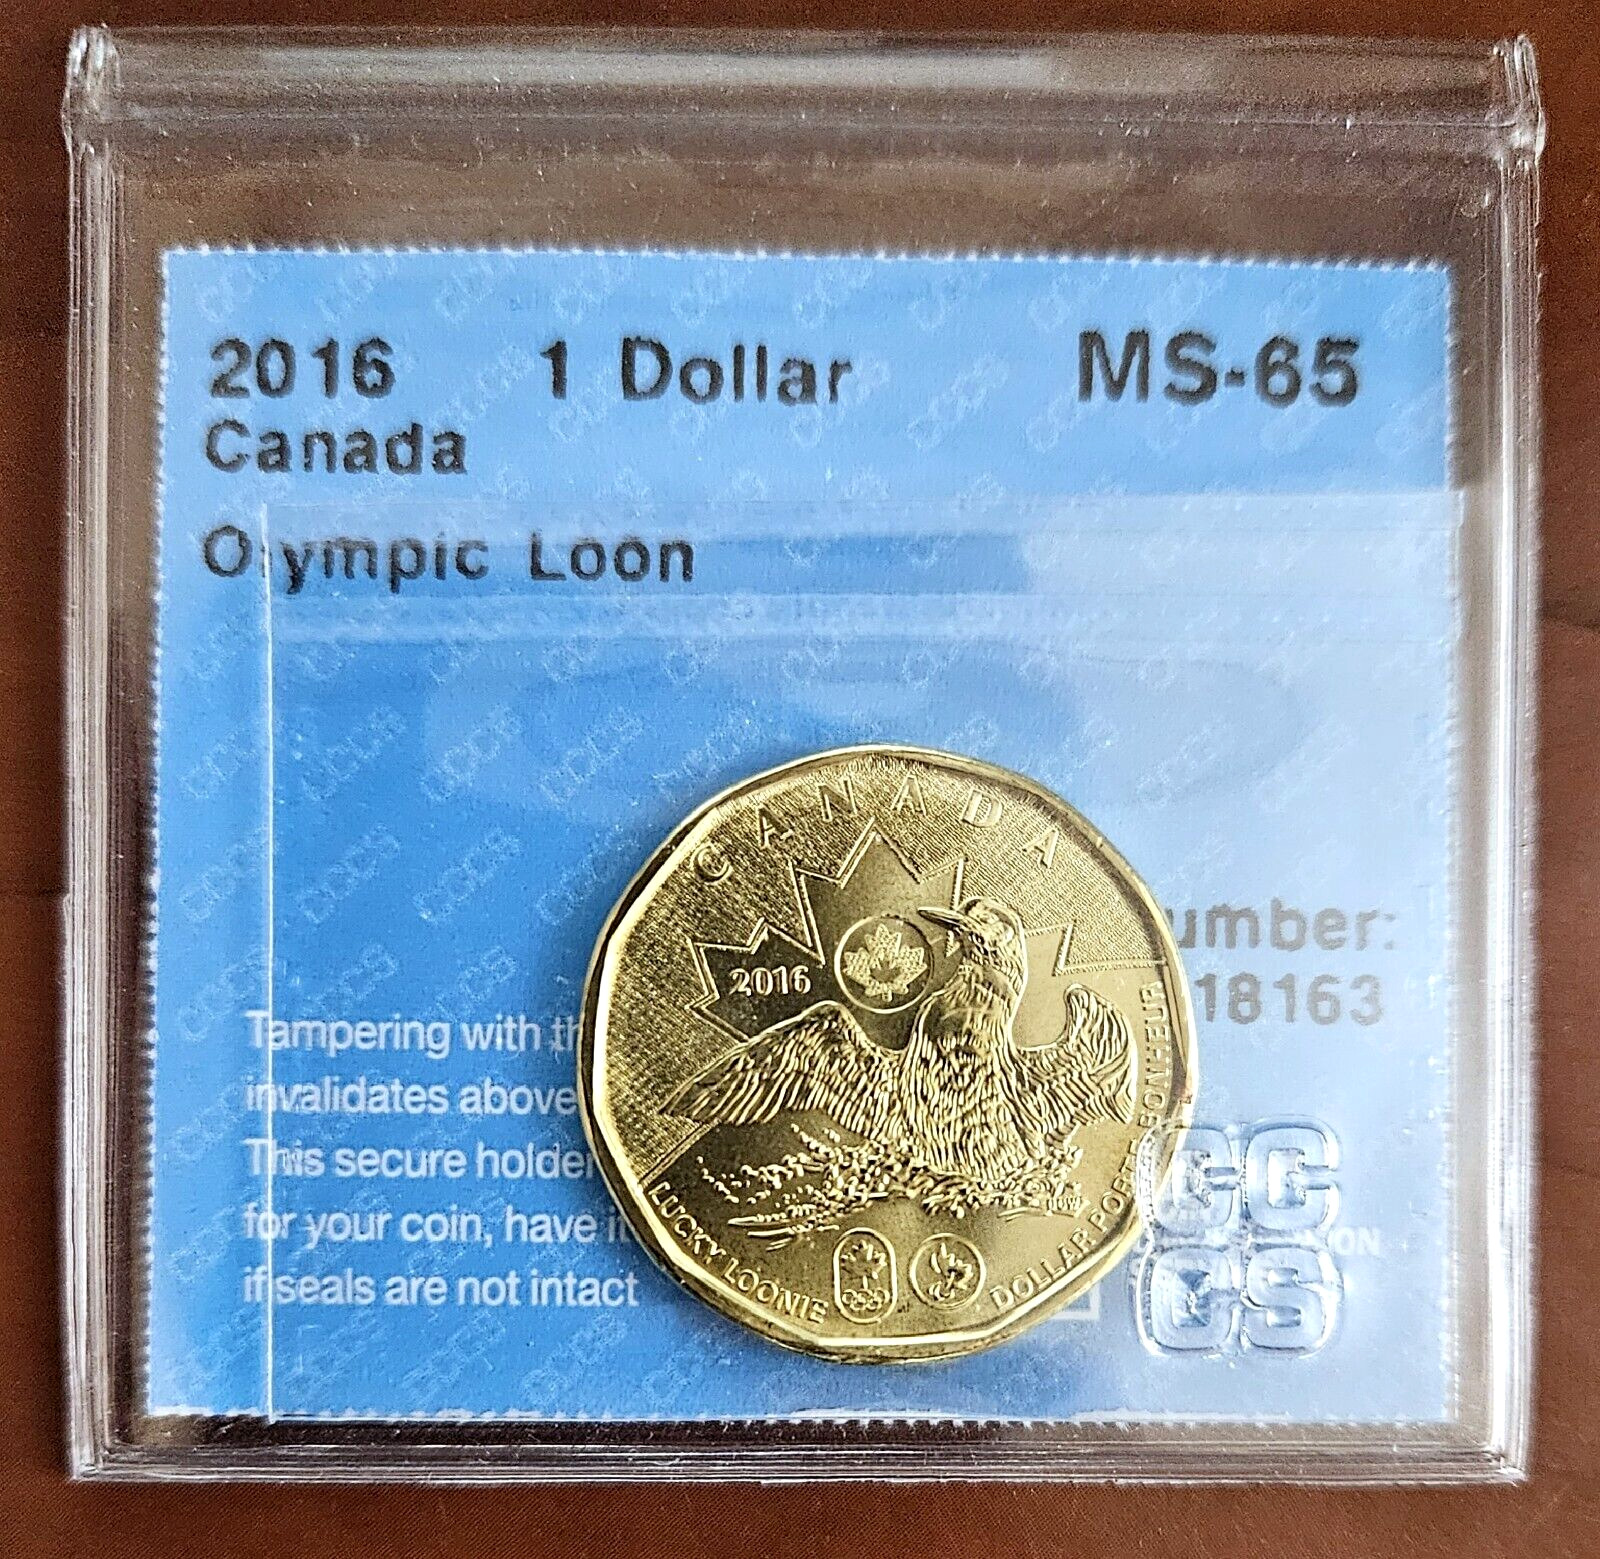 Canada 2016 - Olympic Loon Rio - Gem - (C0210) Certified CCCS MS-65!!